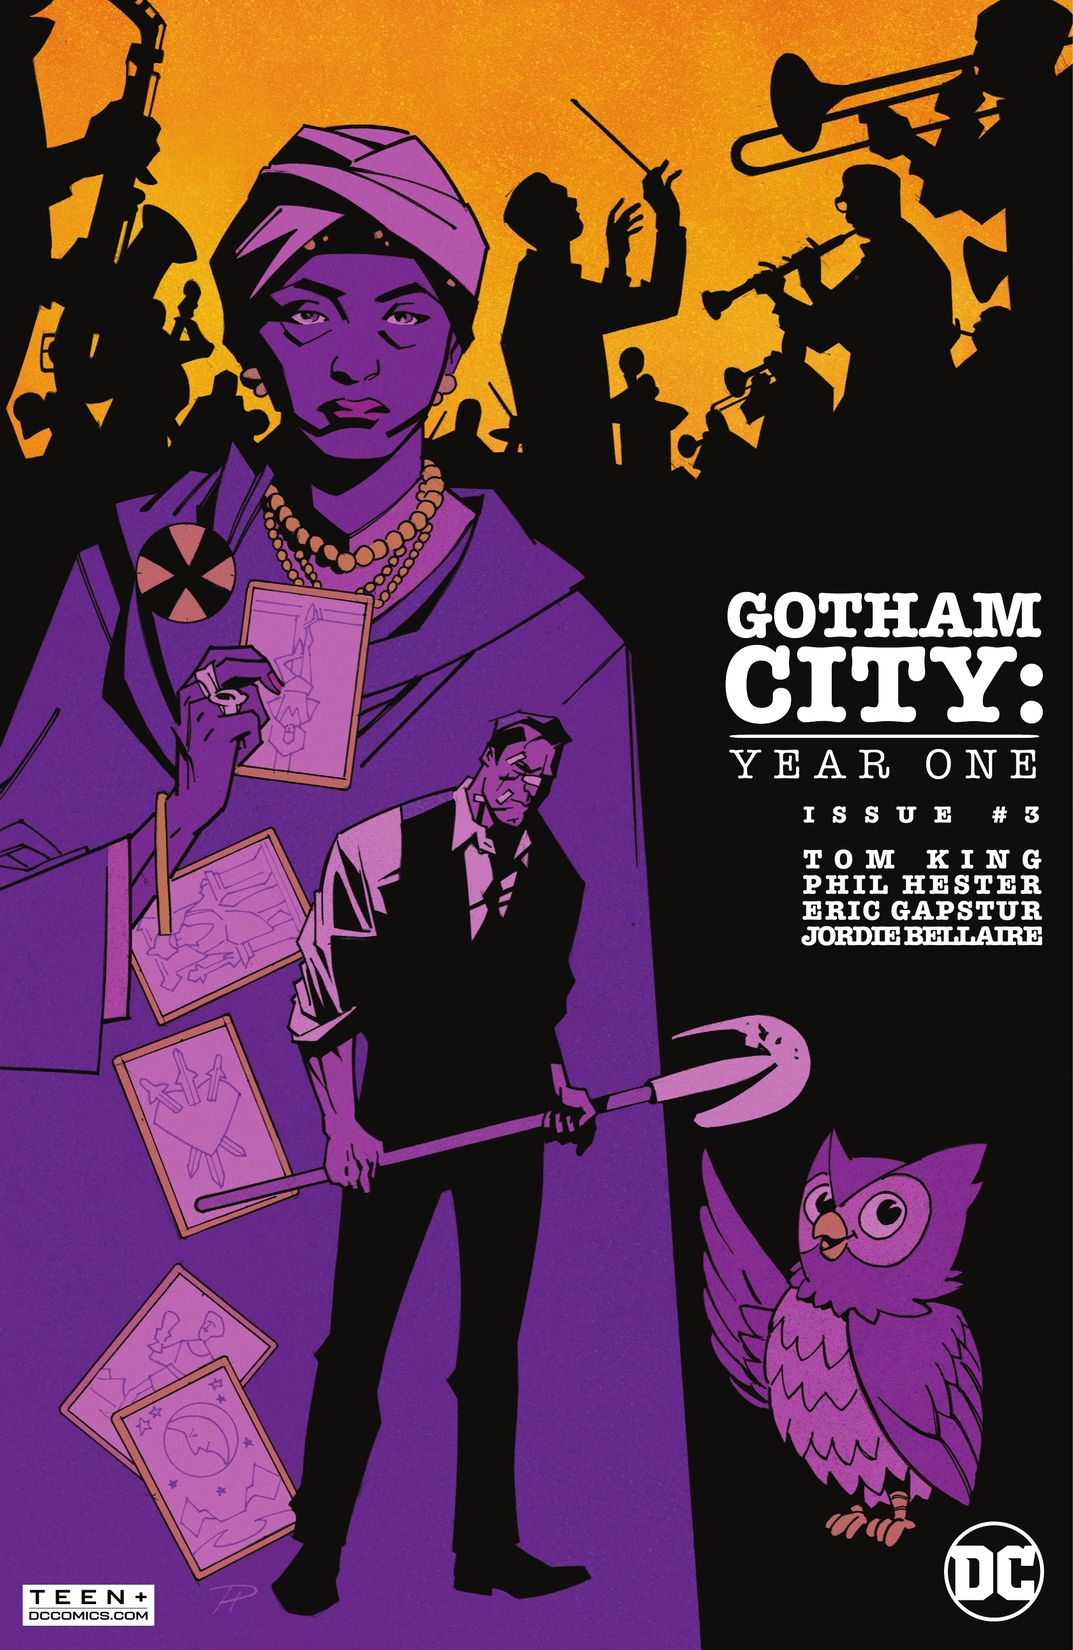 Gotham City: Year One #3 preview images